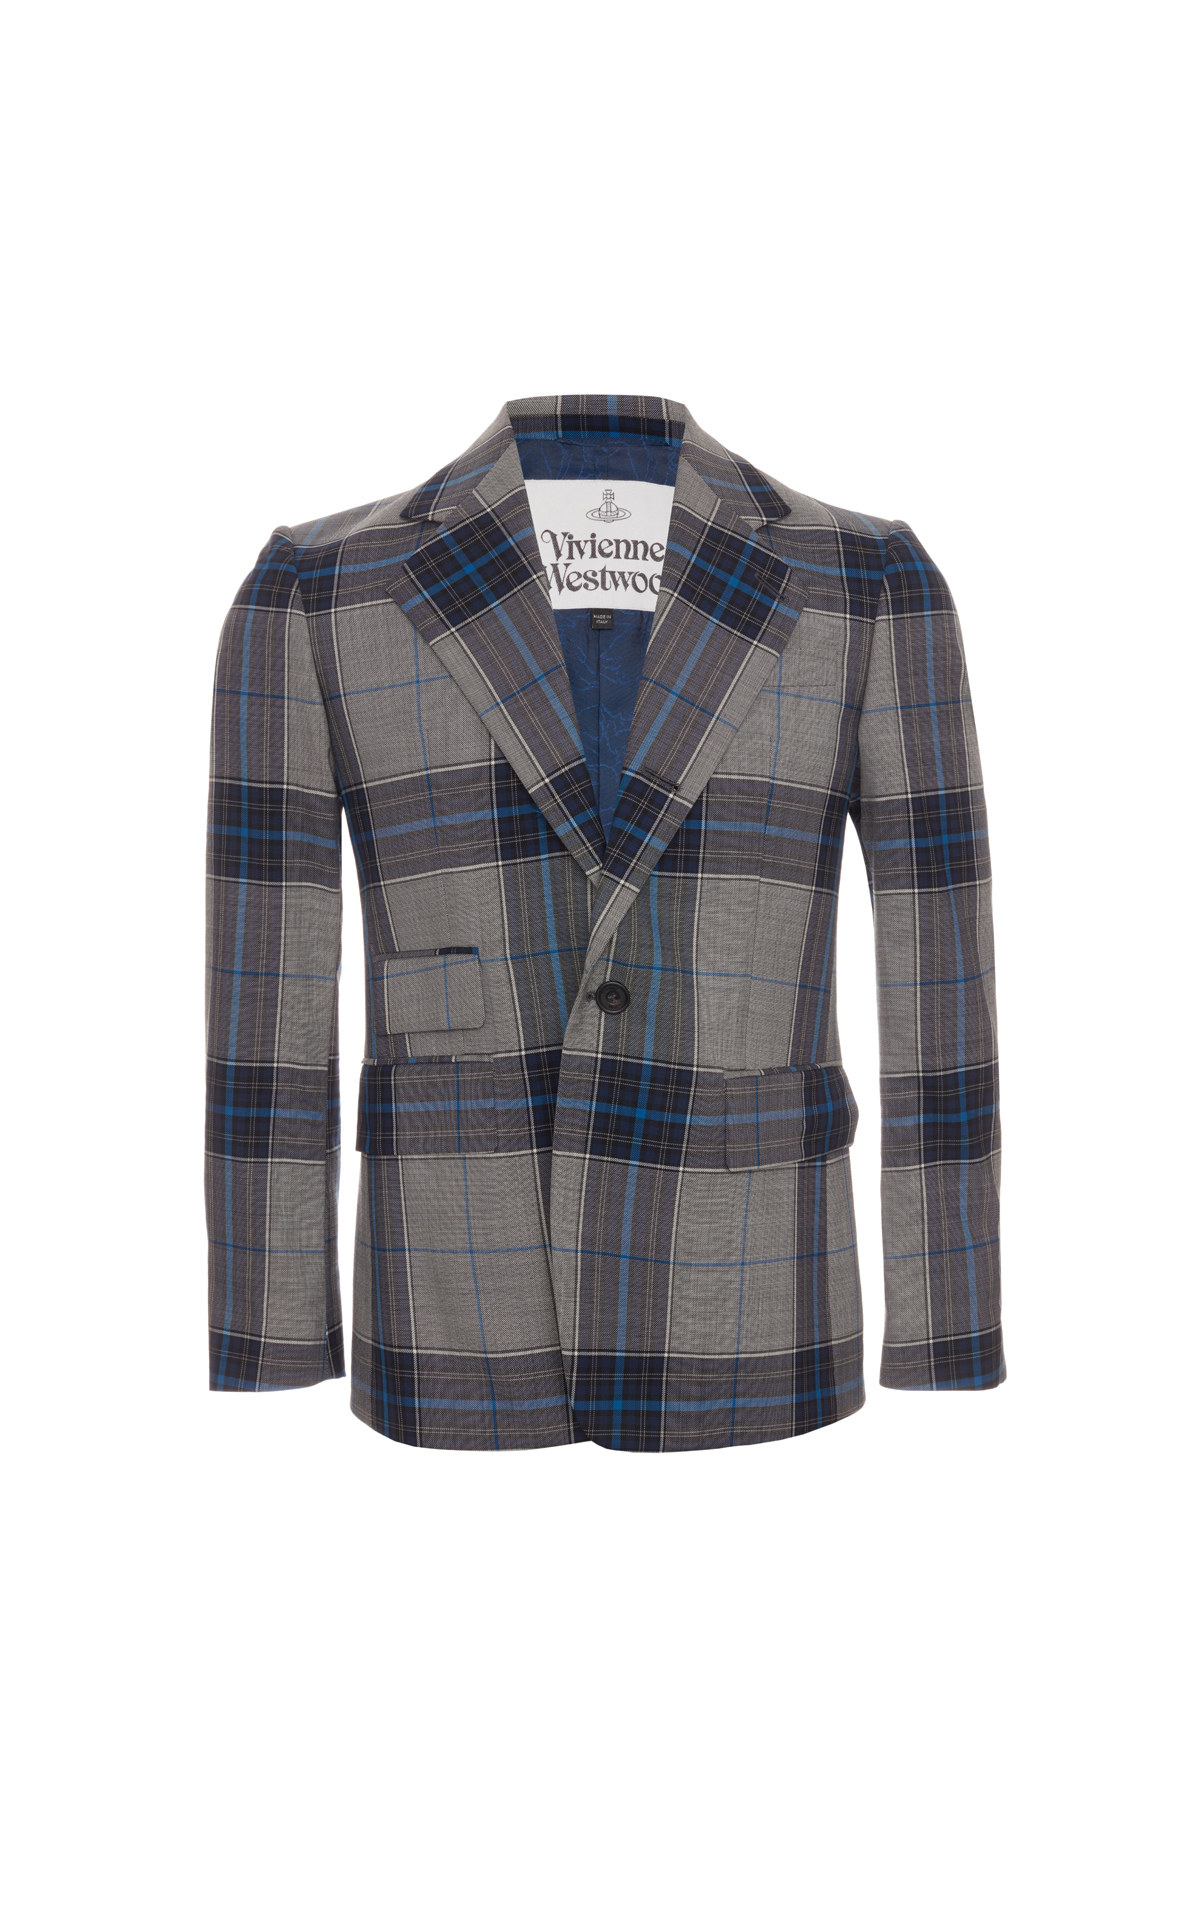 Vivienne Westwood Classic jacket blue checked from Bicester Village